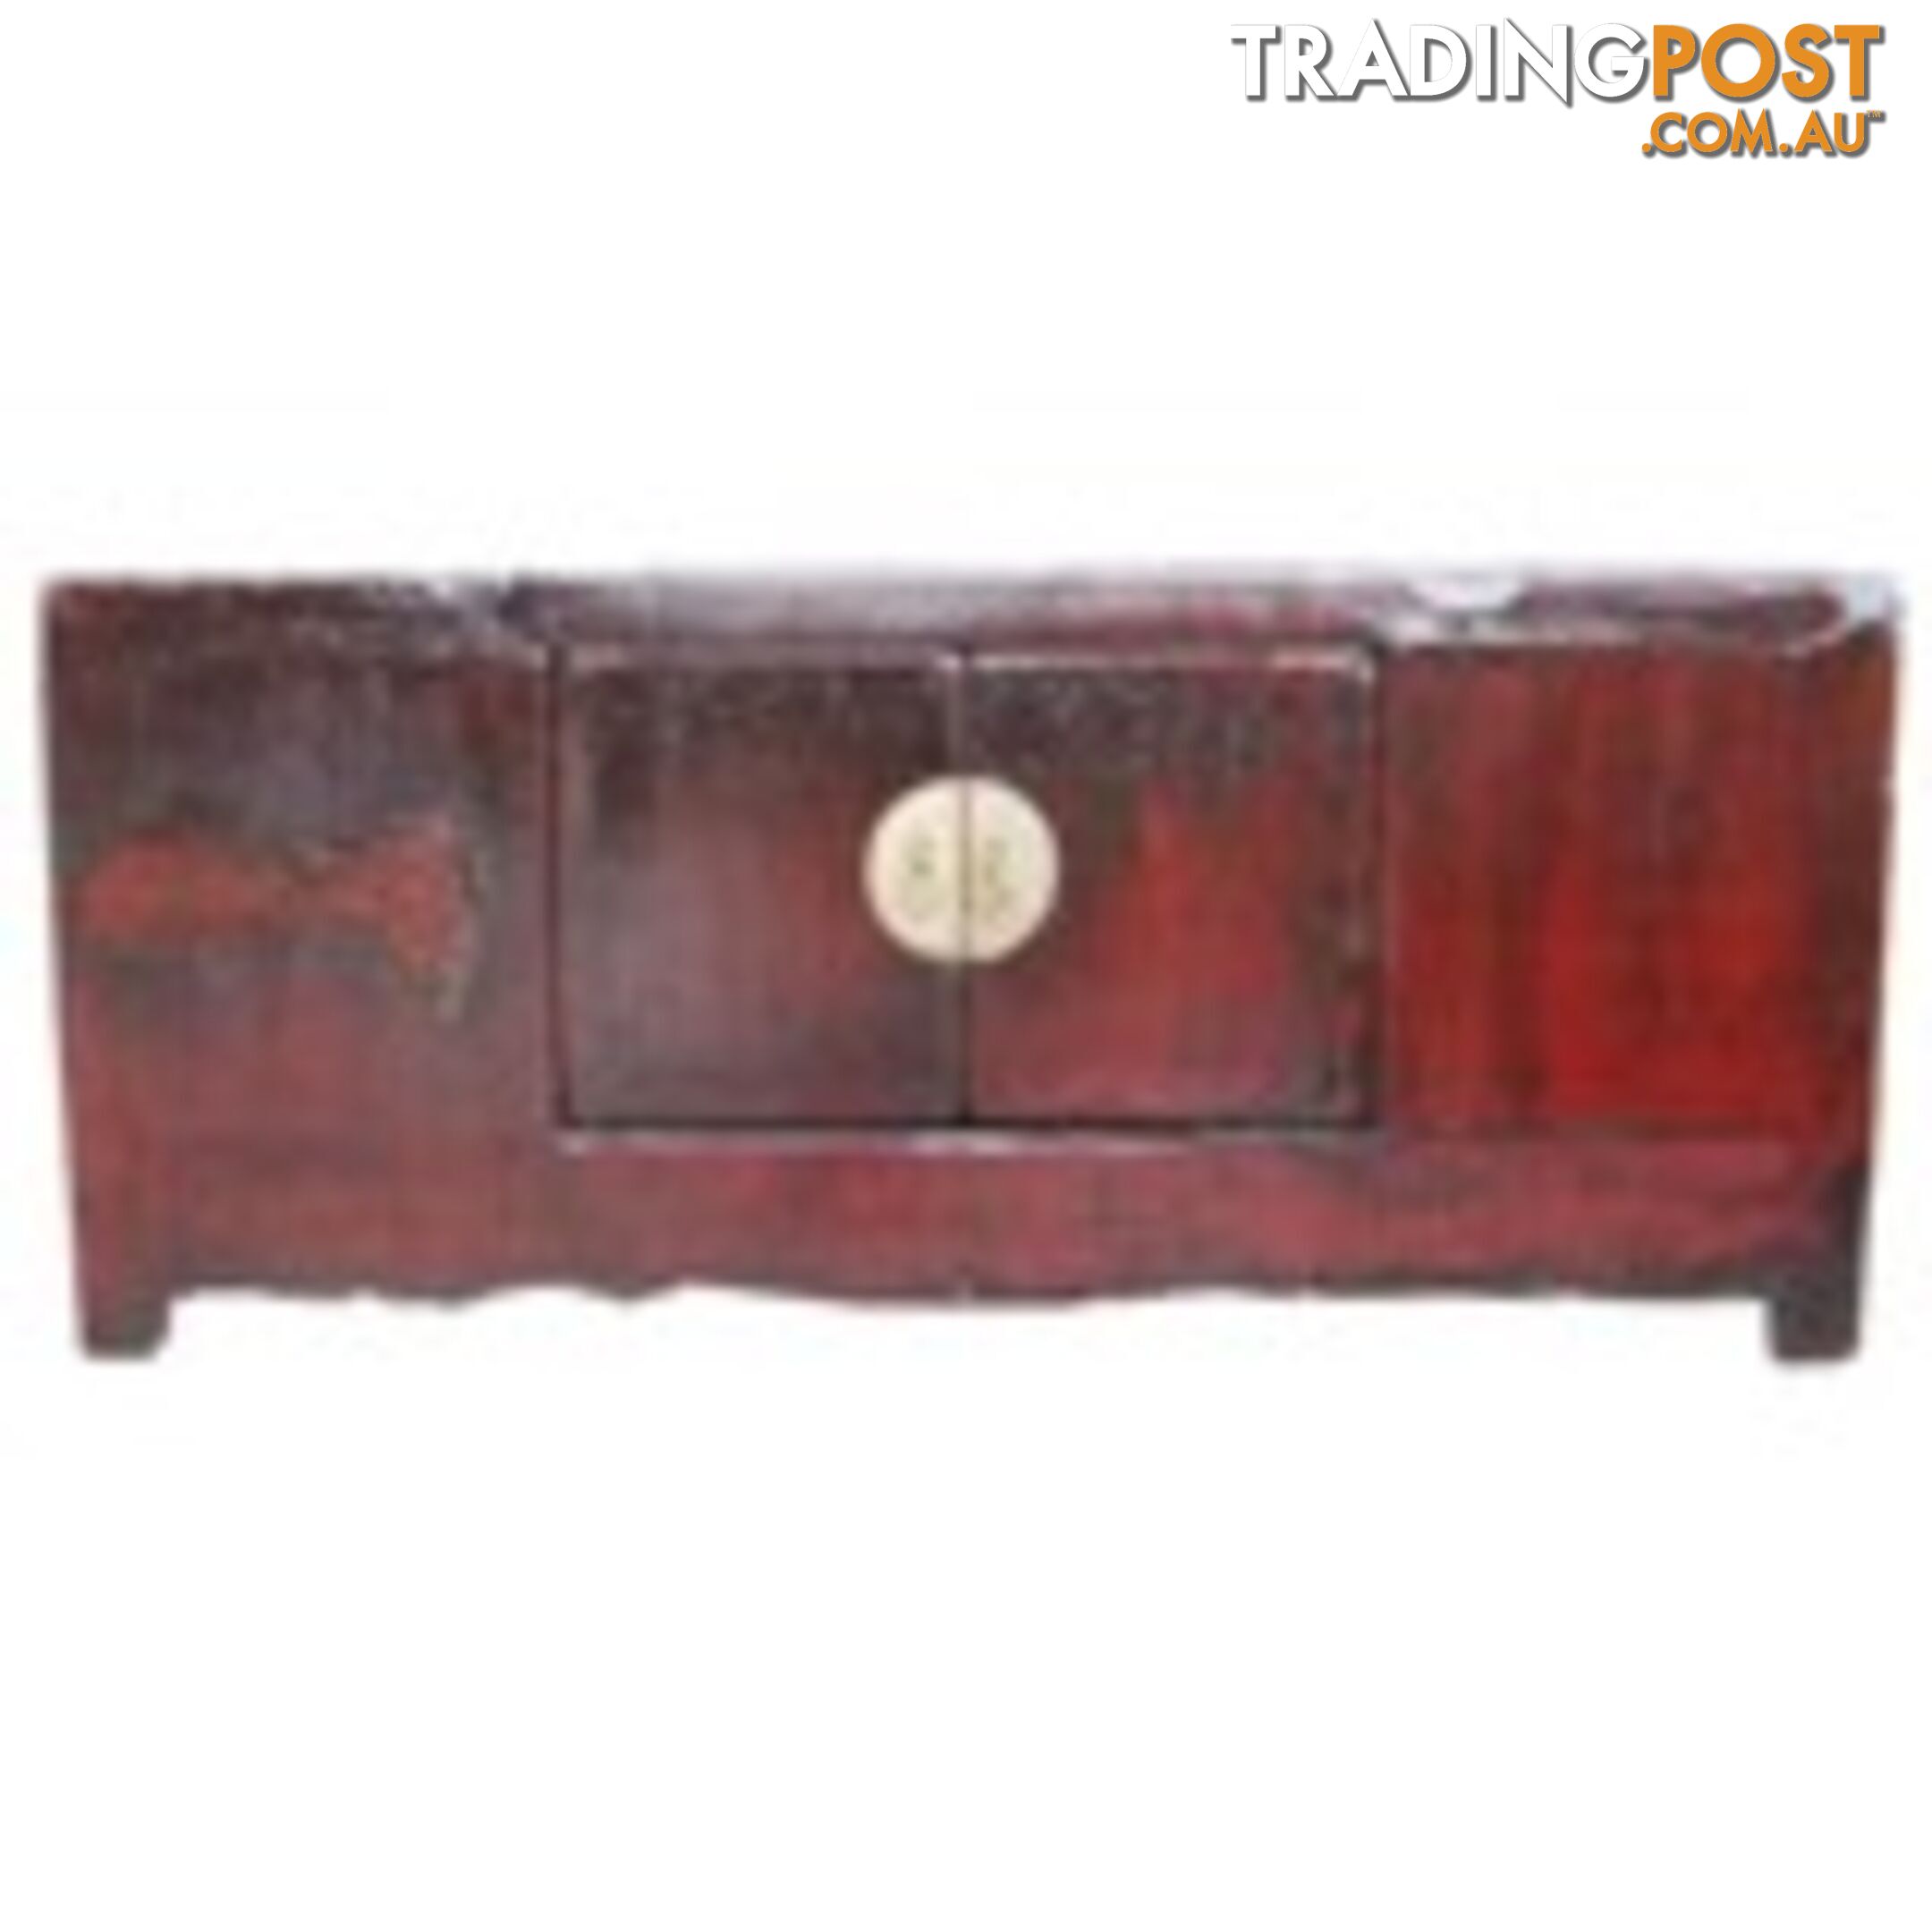 Red Chinese Antique Low Sideboard